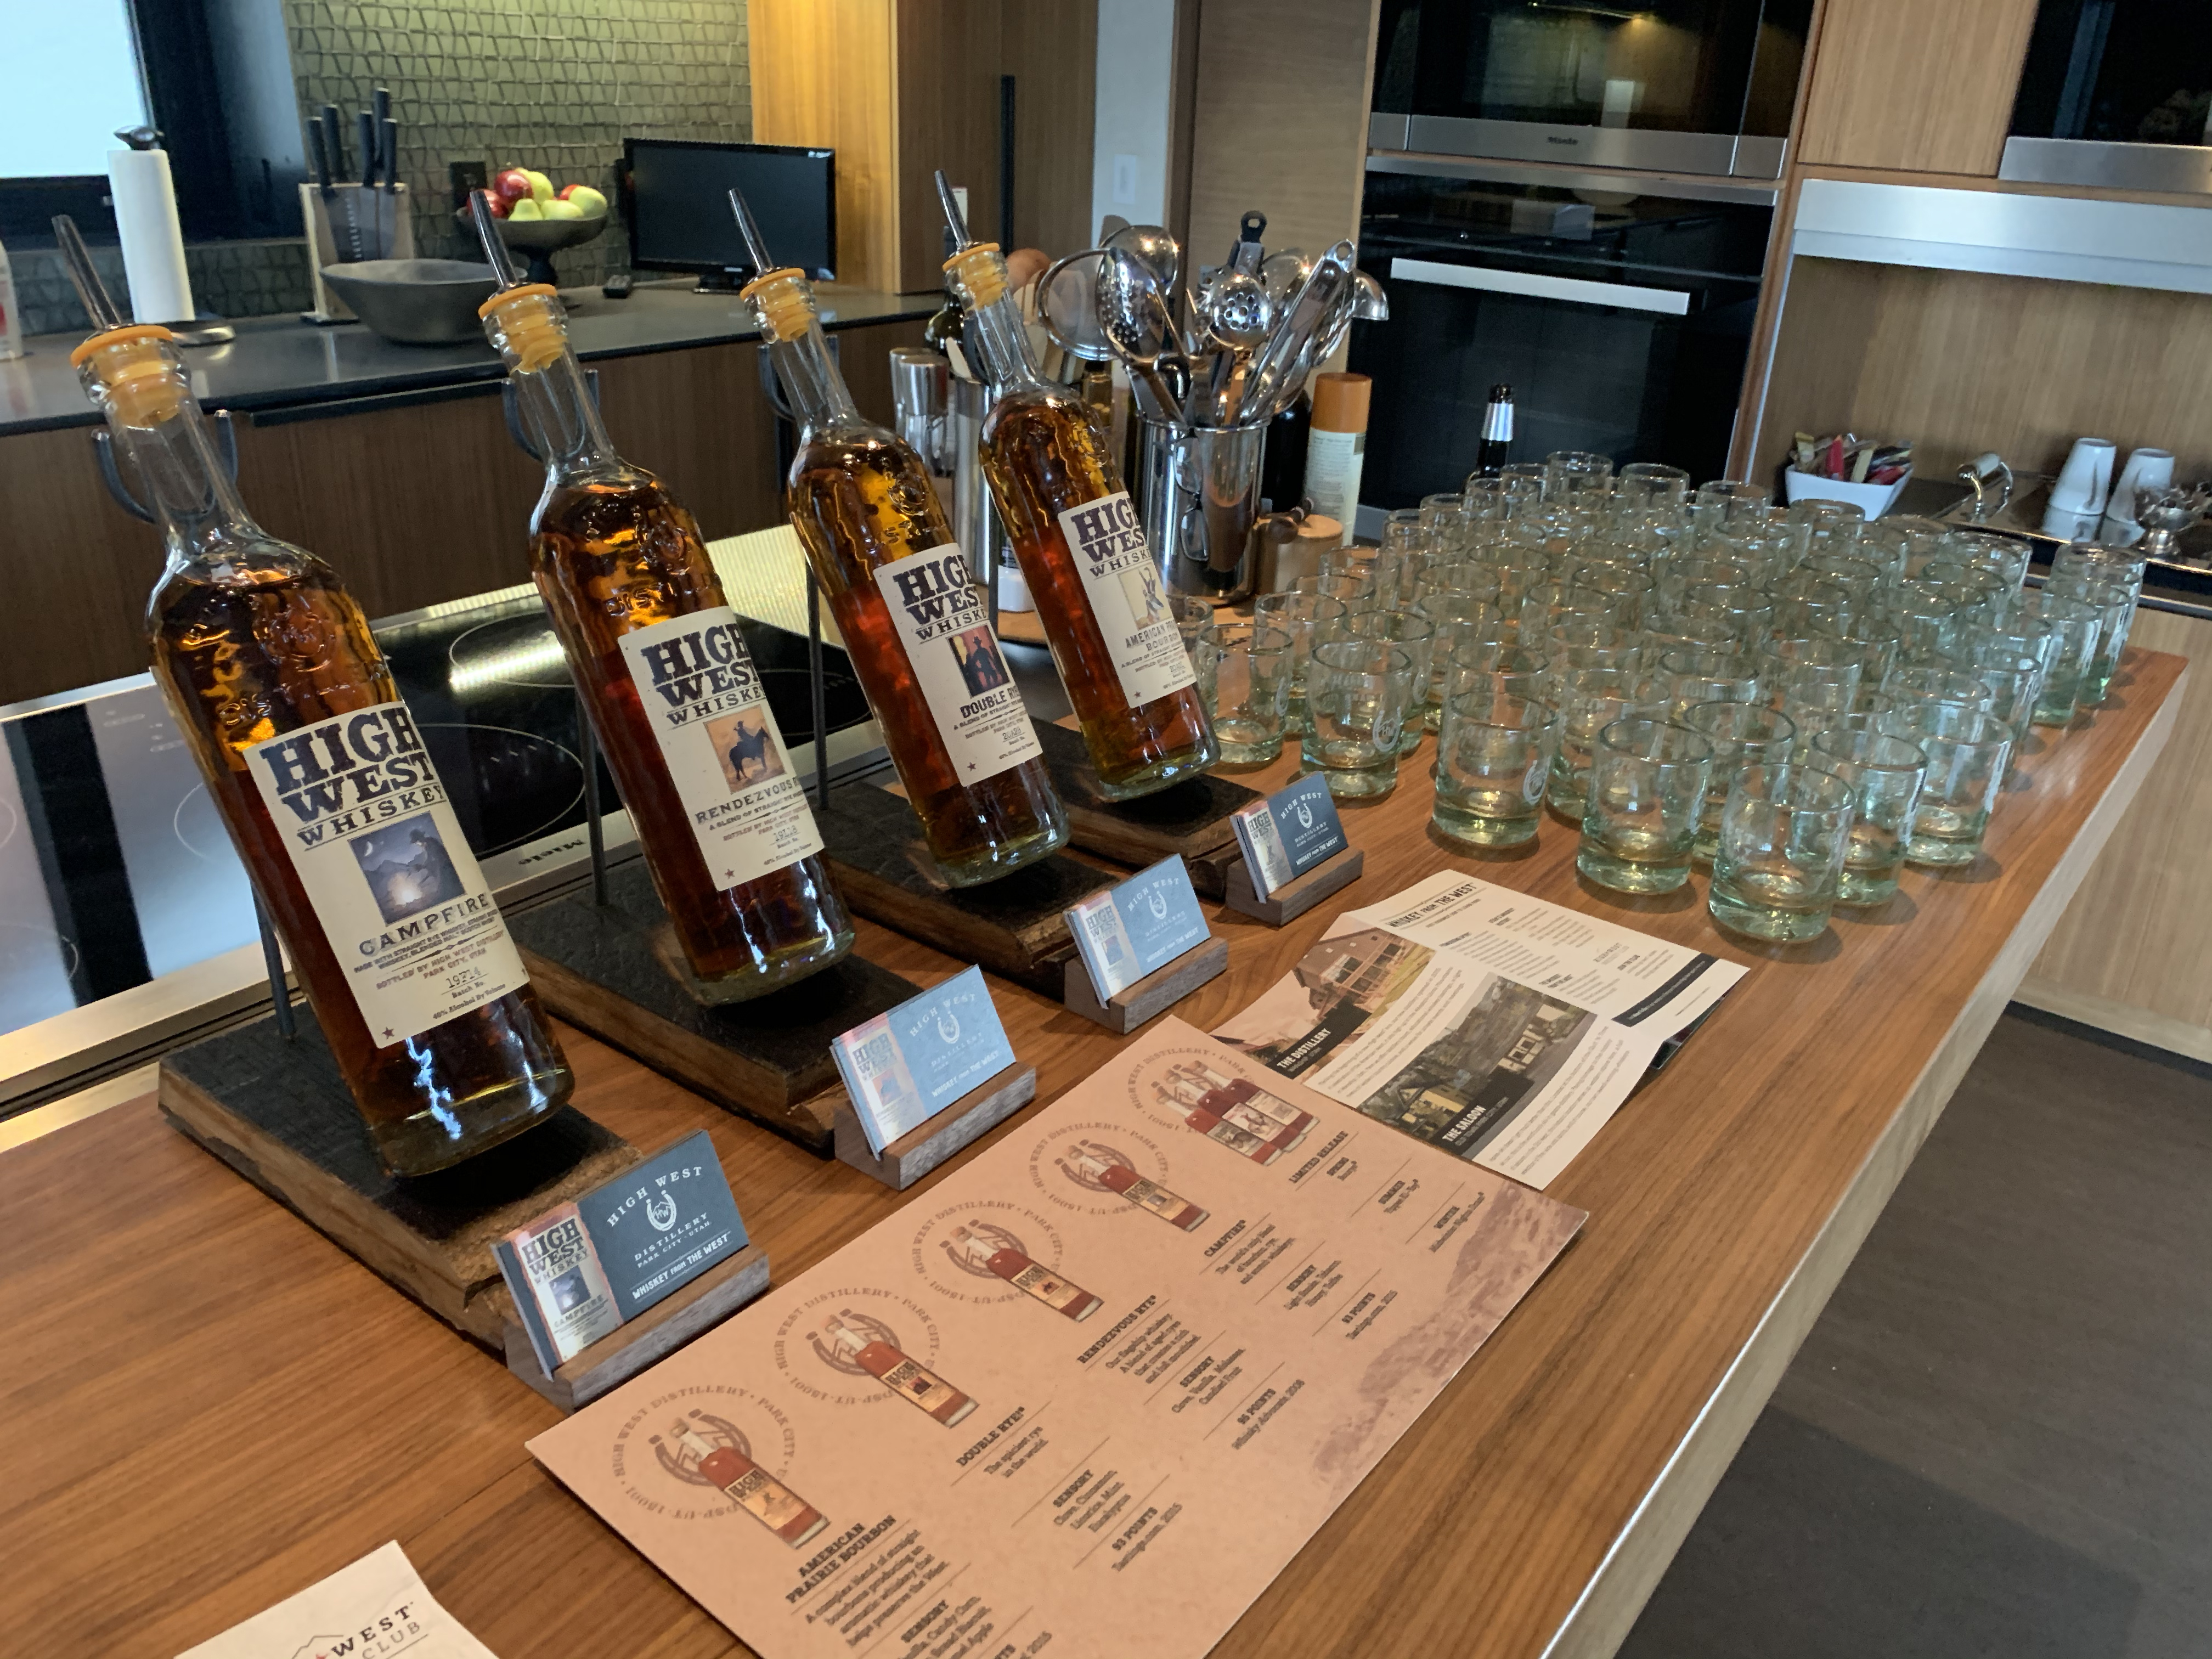 IRHS Whiskey Tasting at Mike Mueller's, LeaseHawk CEO, Park City Home